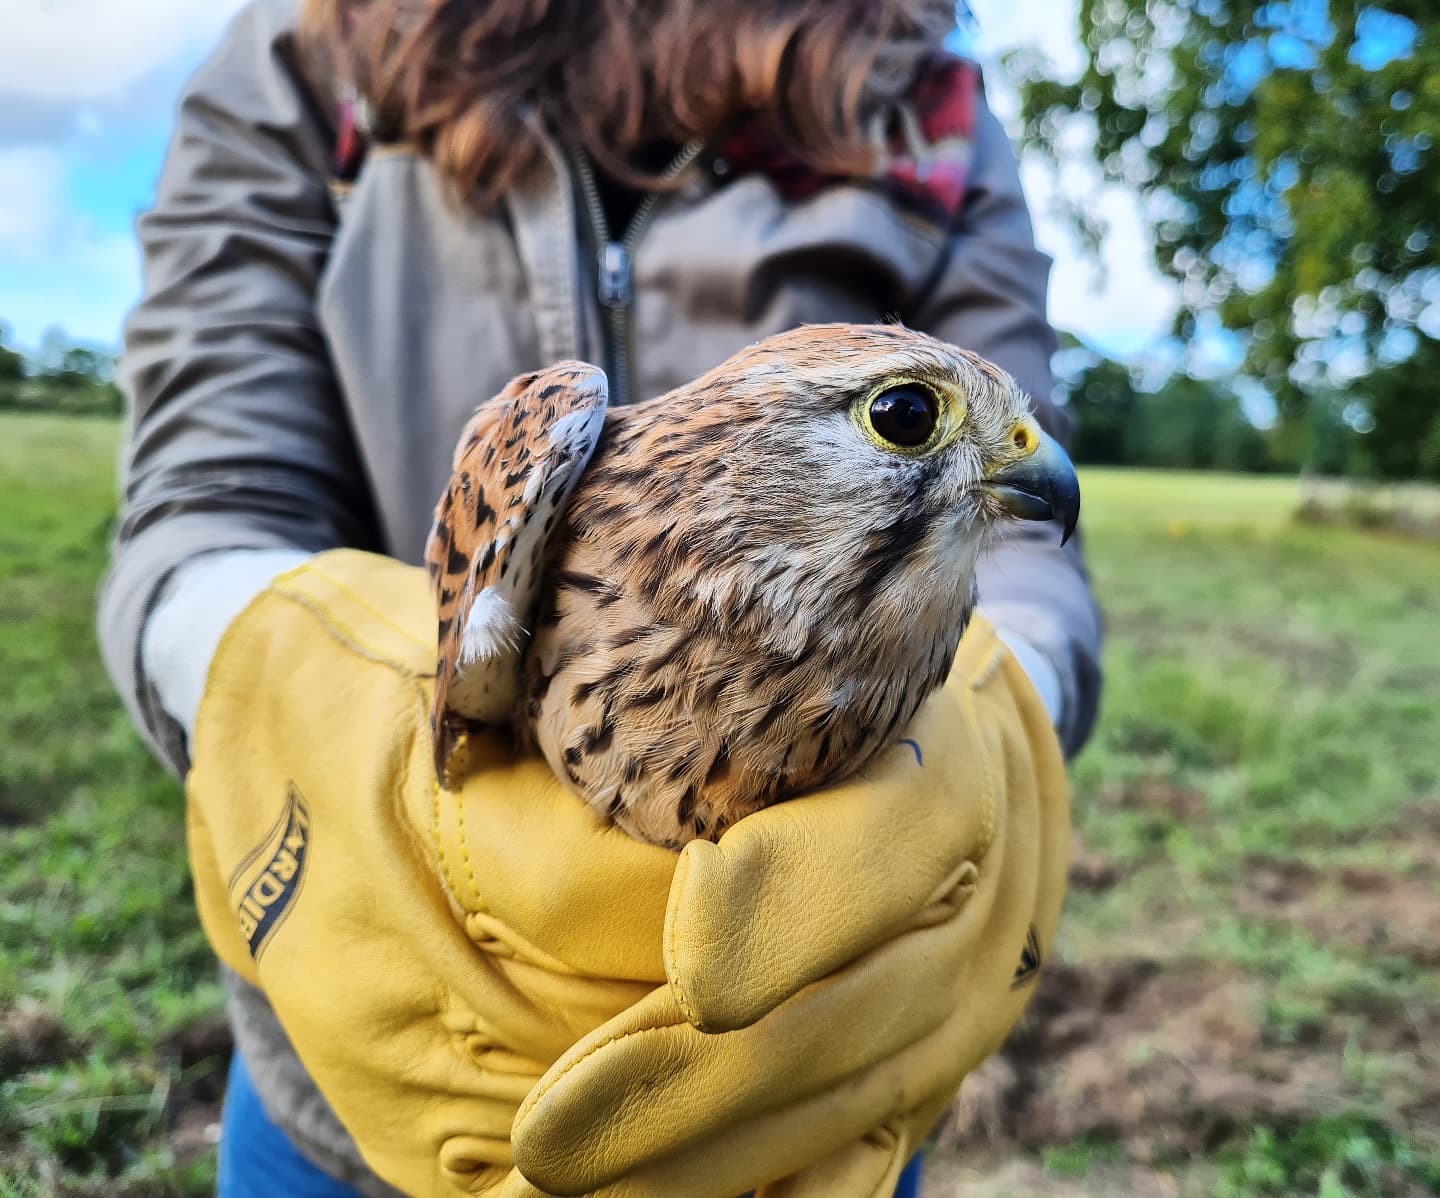 Well it's been a while.. to whoever is still following this account, thanks I appreciate it 😄 I've said tearful goodbyes to Scotland and to the RSPB as I start a new position in my second home with the LPO in France. You're looking at the new Communications Assistant ! And well my first day went pretty well : released a Kestrel that had been injured by a car 🚗 🦅 

I will be working closely with the Rehabilitation Centre for Injured Animals 🚑🏥 improving their online visibility and fundraising!

#birdwatching #birdlovers #bird #kestrel #europeankestrel #birdsofinstagram #birdphotography #birding #wildlifebiologist #naturephotography #conservation #blogging #education #naturelover #naturereserve #research #birds #nature_perfection #naturepic #photography #wildlifephotography #wildlifeonearth #wildlifeaddicts #wildlifeplanet #prey #birdofprey